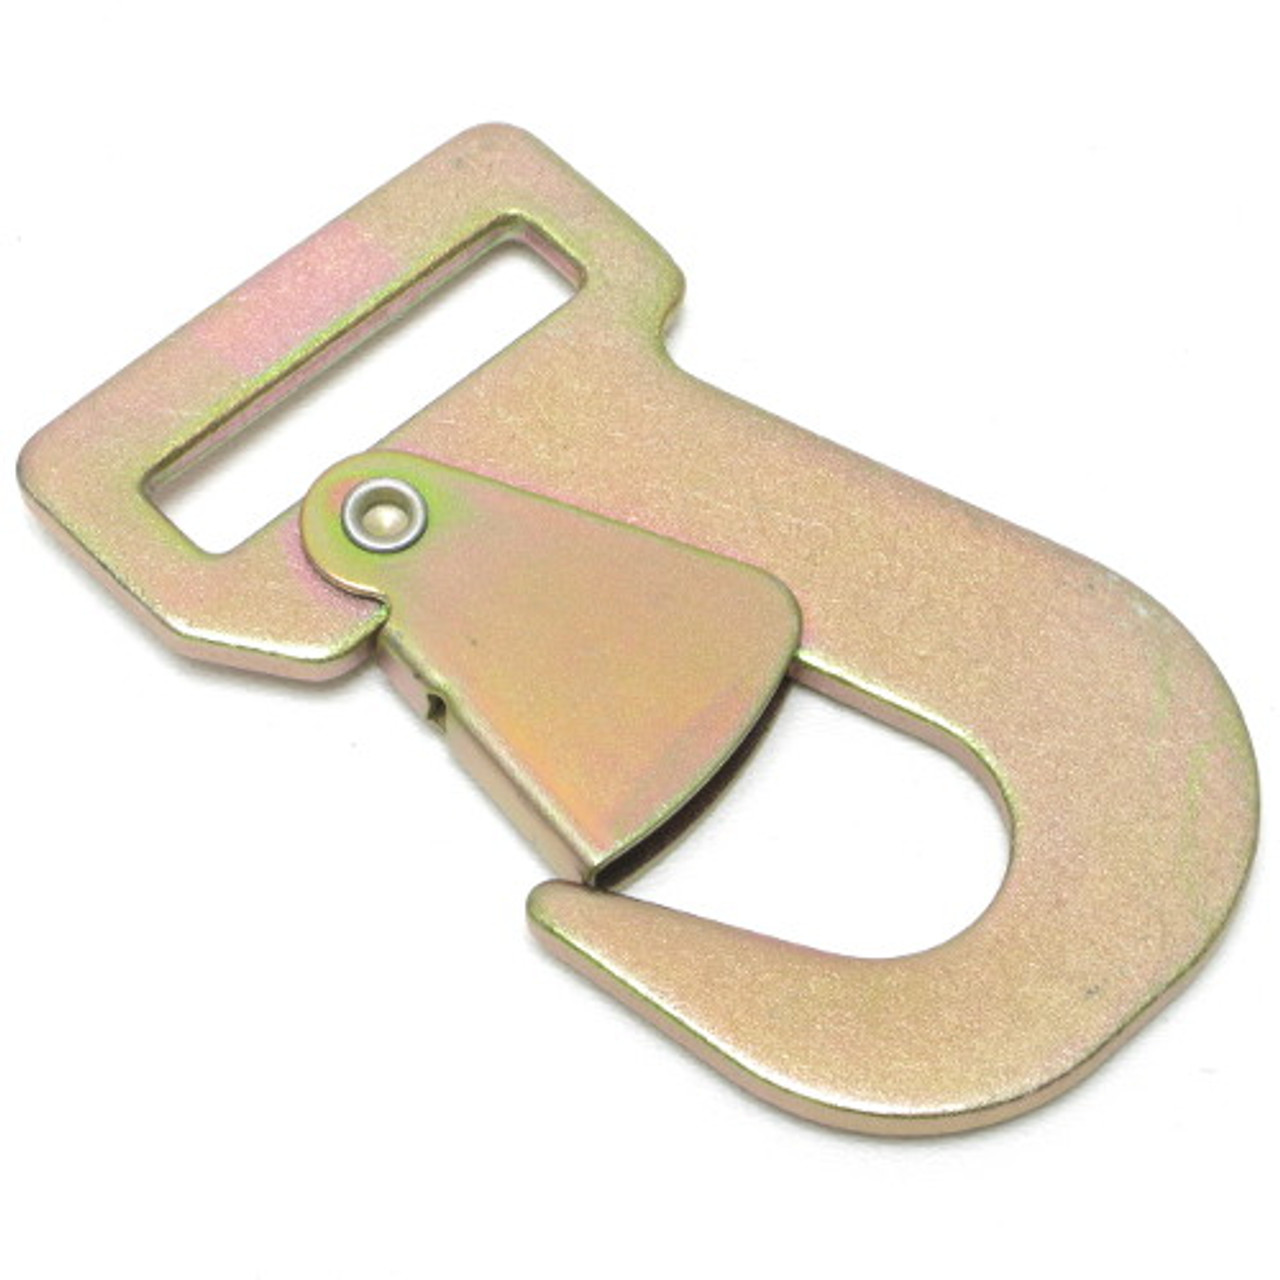 https://cdn11.bigcommerce.com/s-1lji4r5cj2/images/stencil/1280x1280/products/2948/28395/1.75-Flat-Snap-Hook-with-Safety-Latch__S_1__67841.1628028924.jpg?c=1